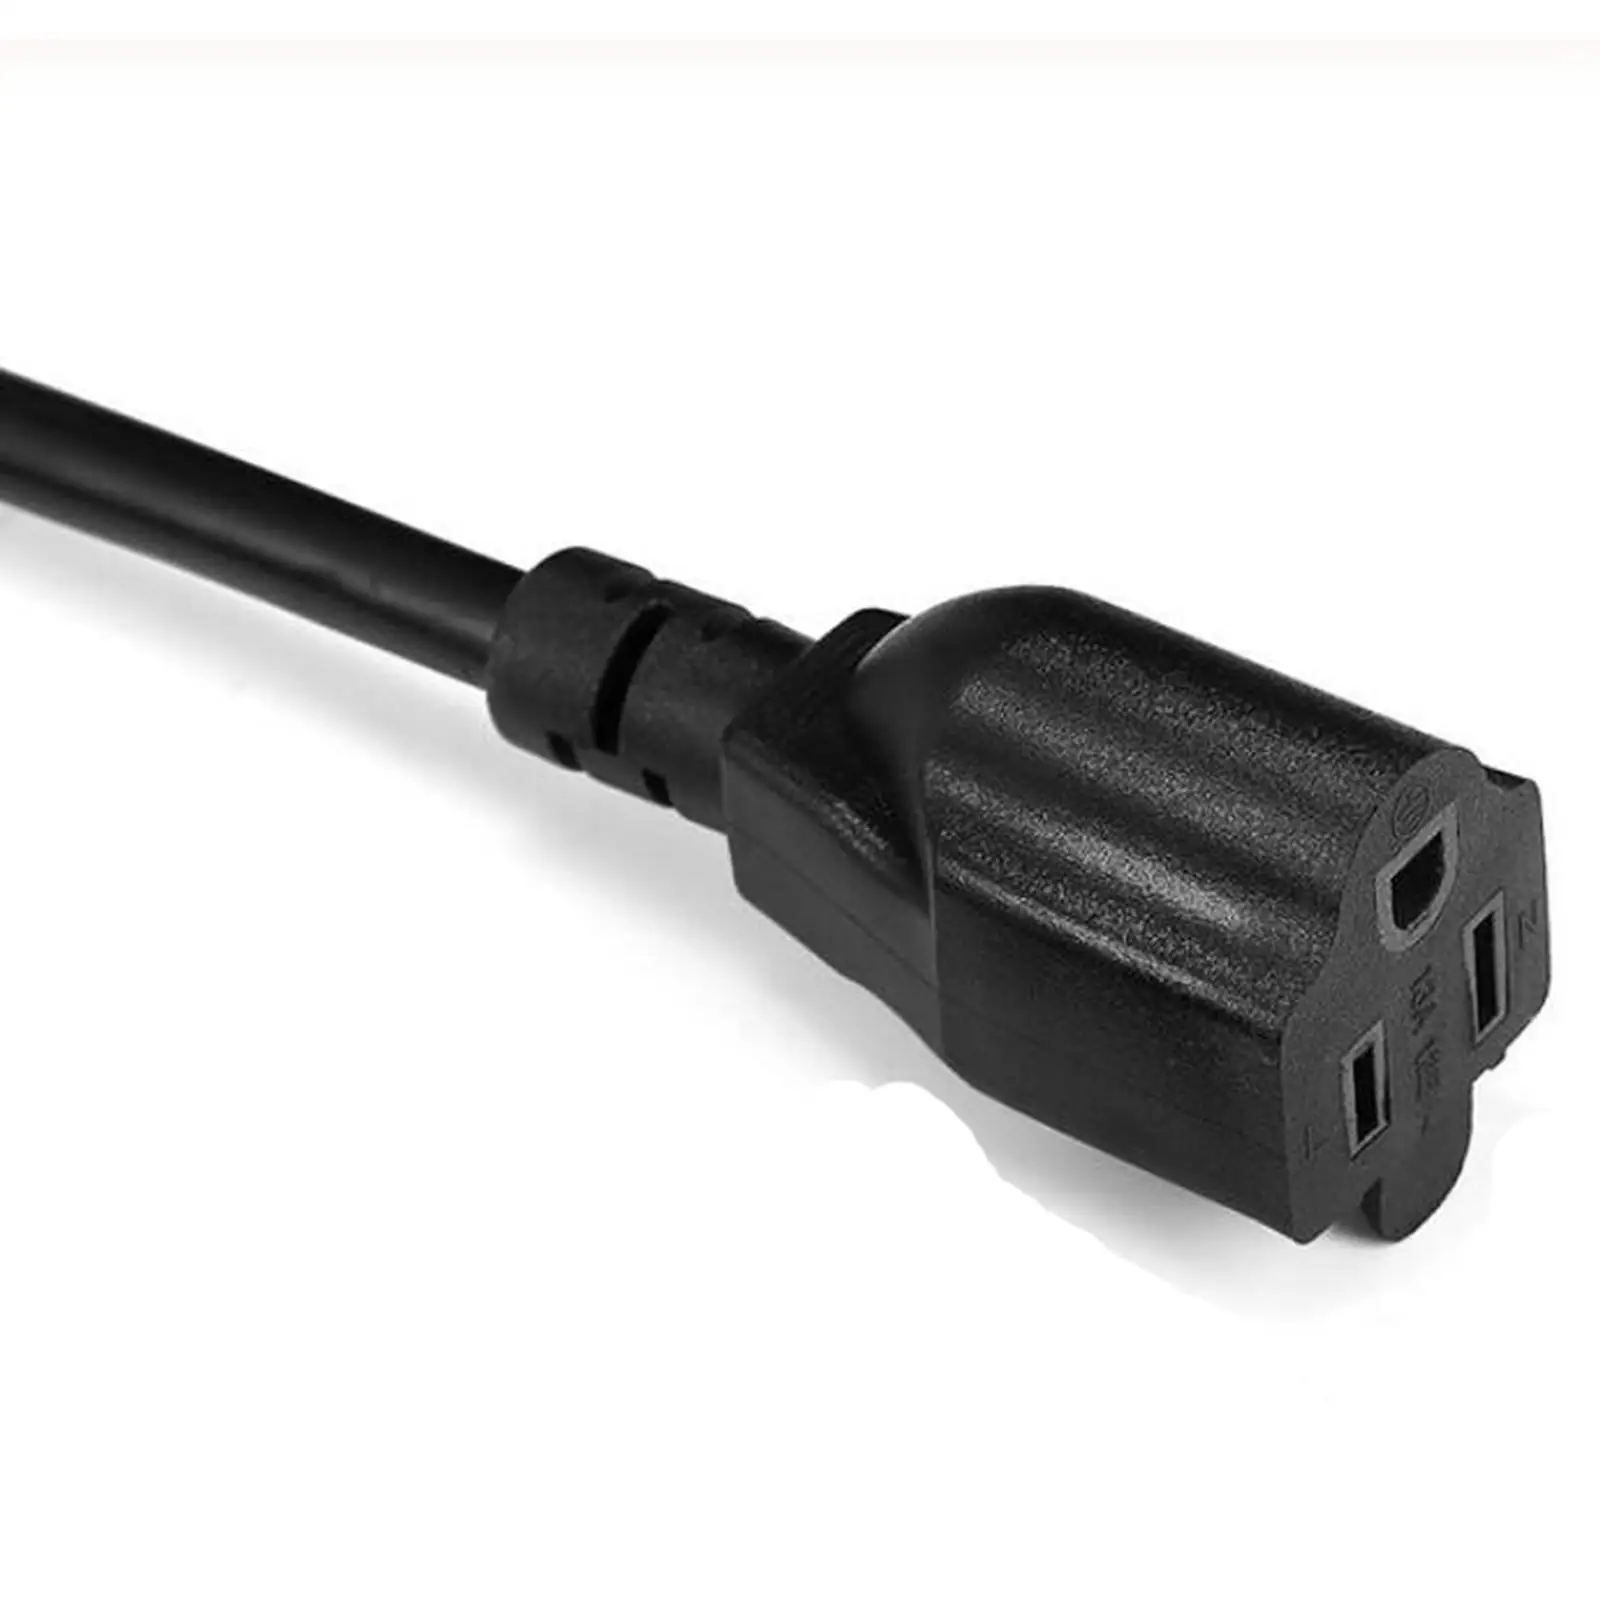 Universal Power Cable  Plug to 5-15R 30cm Repl es  cessory Easily Install Professional ,bl k Performance